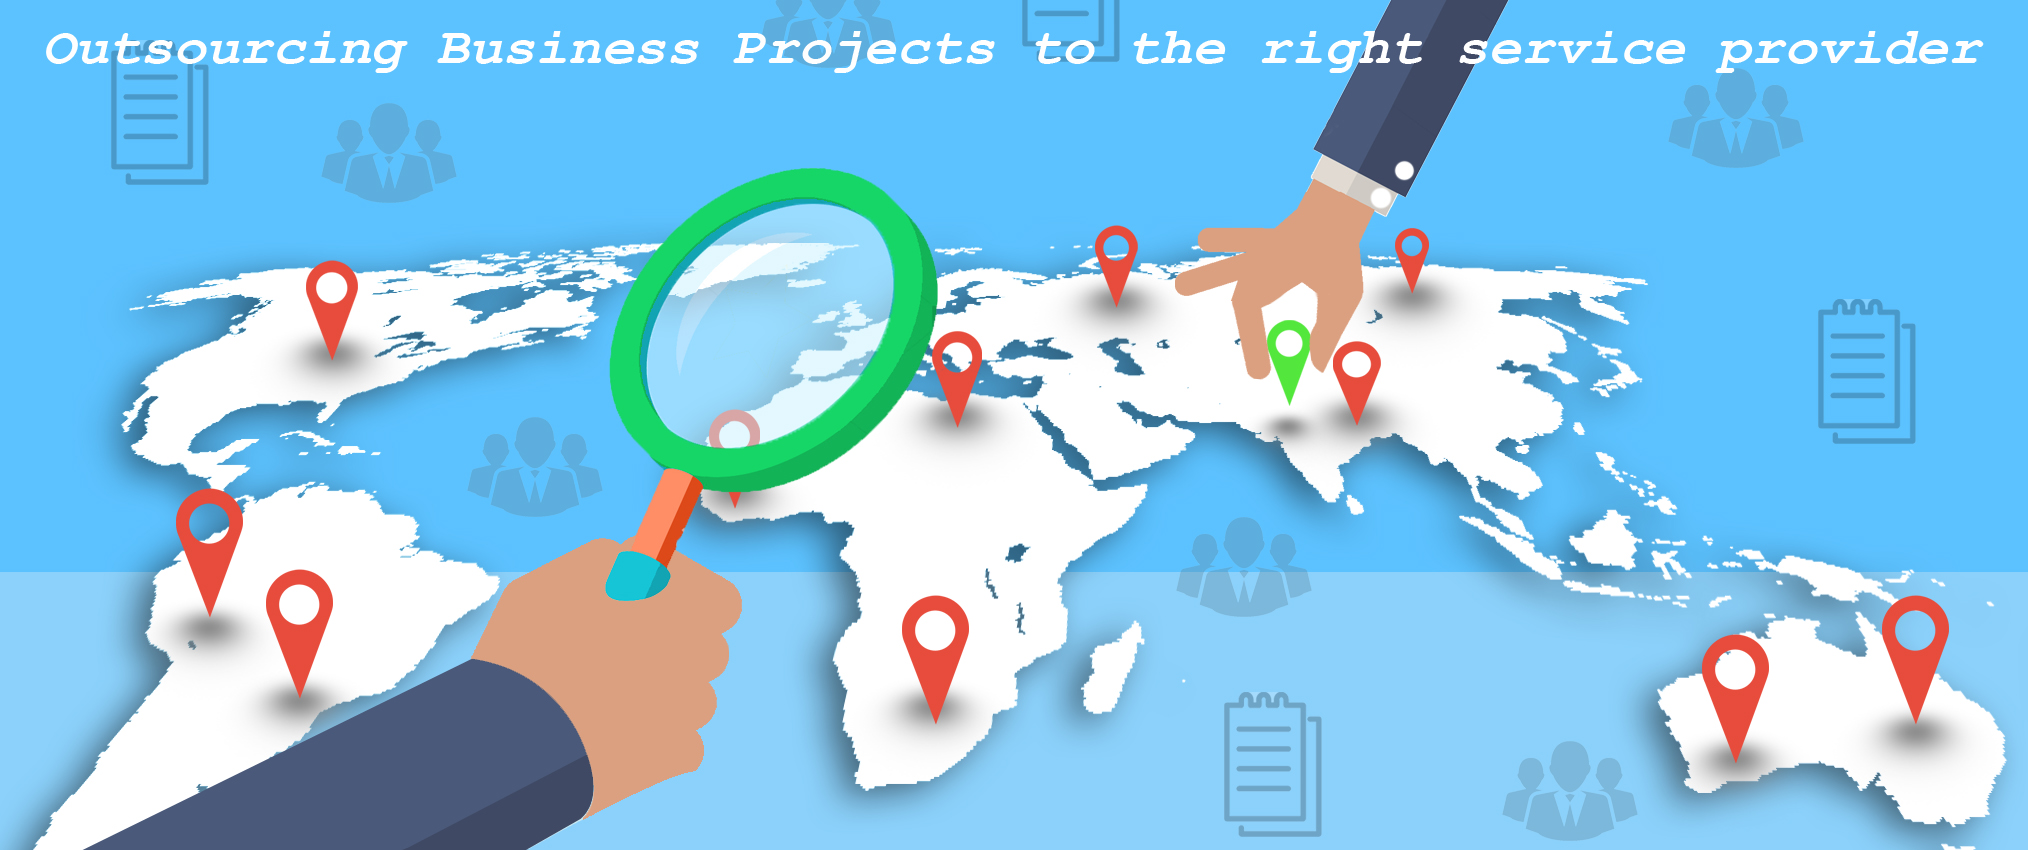 Outsourcing Business Projects to the right service provider